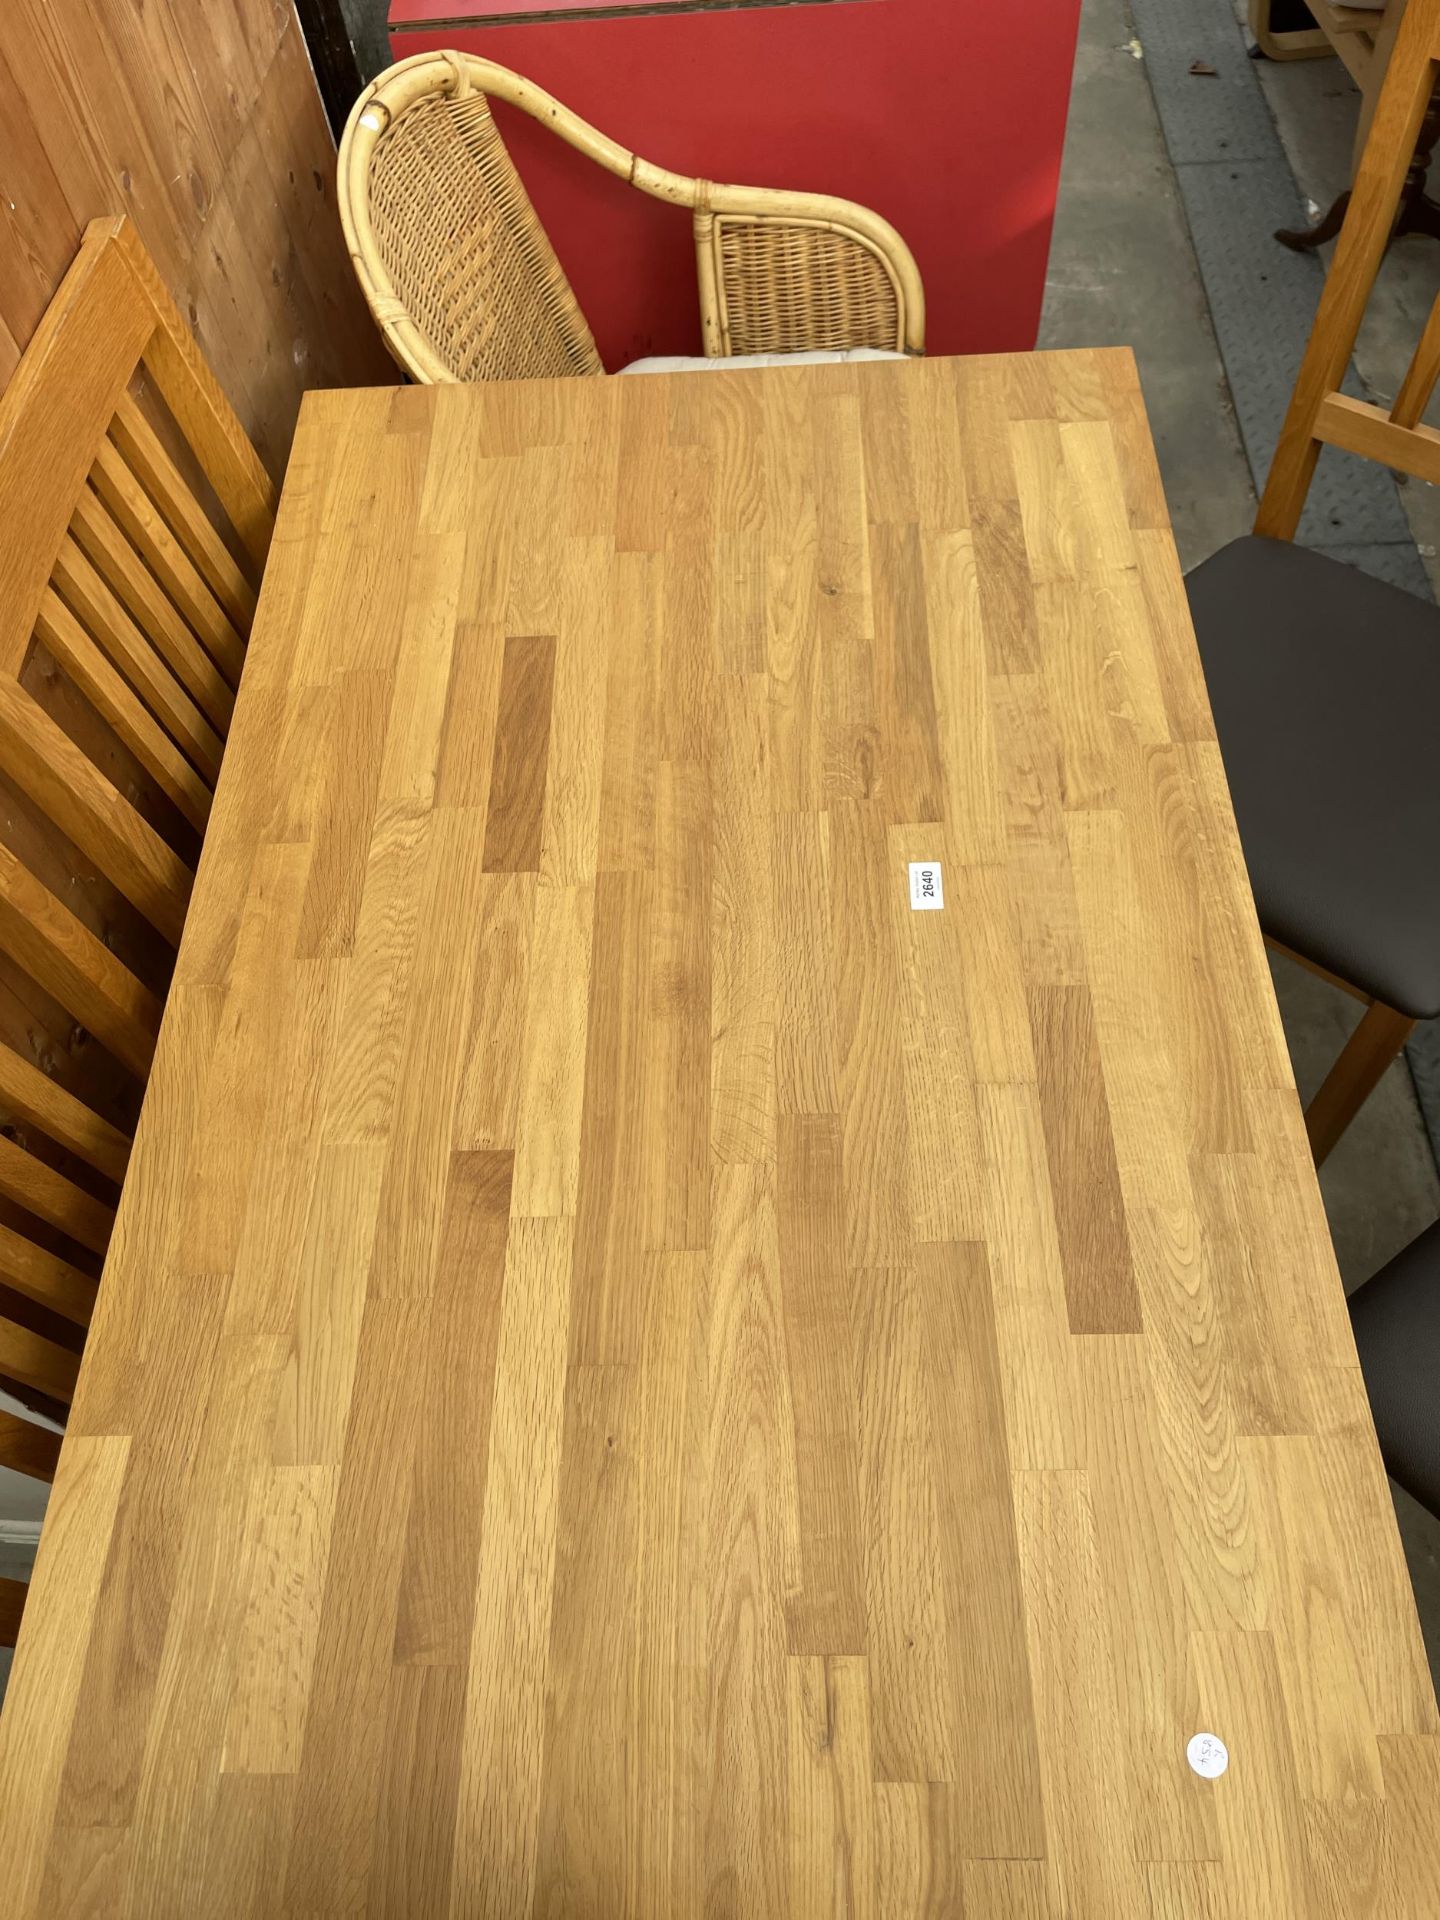 A MODERN OAK WOODBLOCK DINING TABLE, 45" X 28", AND FOUR CHAIRS - Image 4 of 5